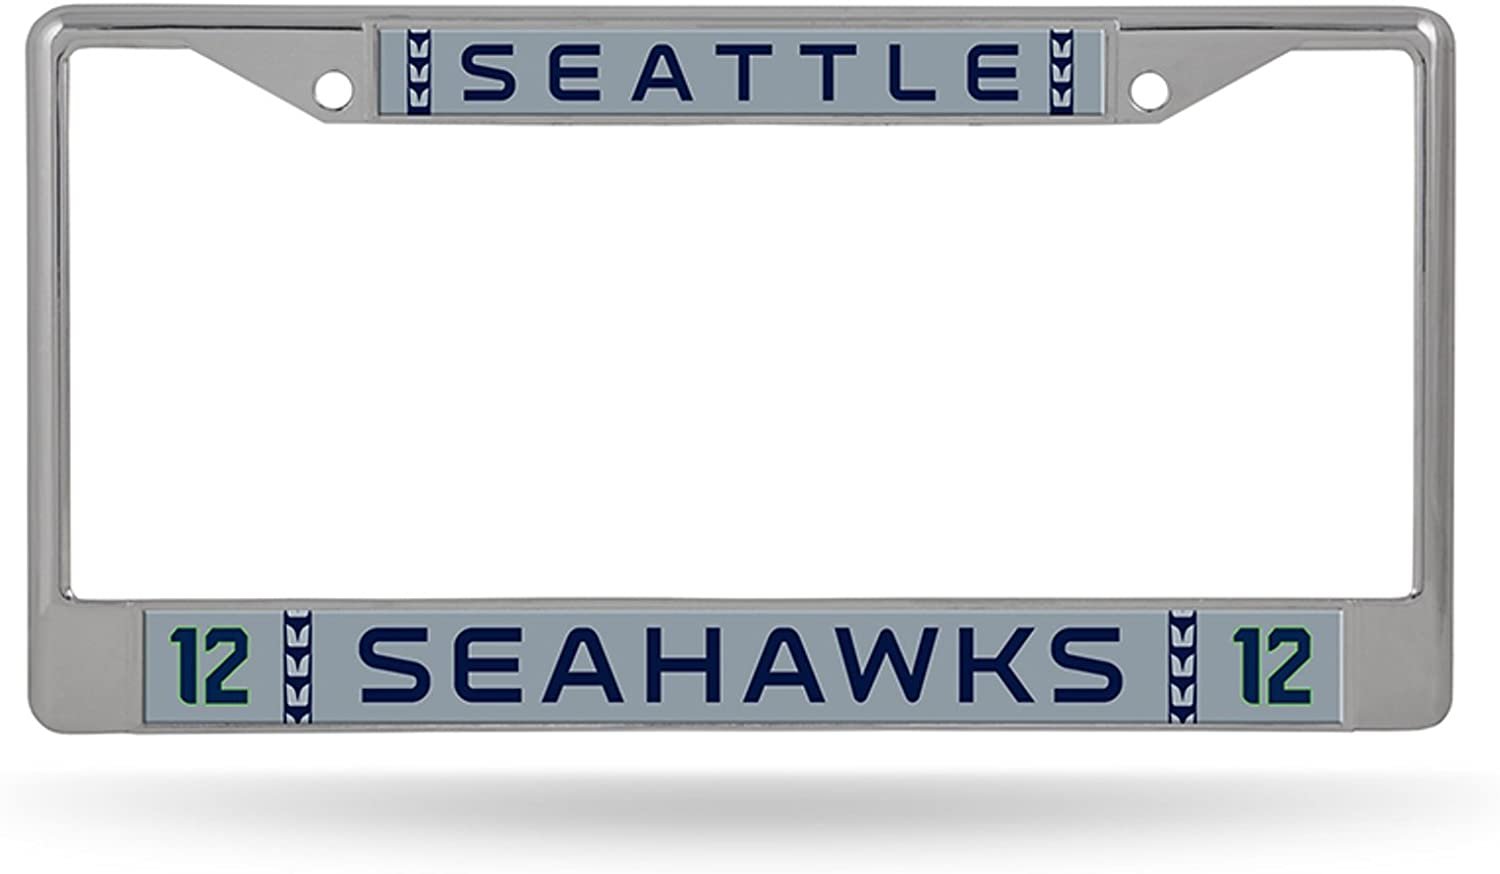 Seattle Seahawks Metal License Plate Frame Chrome Tag Cover, 12th Man Gray Jersey, 6x12 Inch